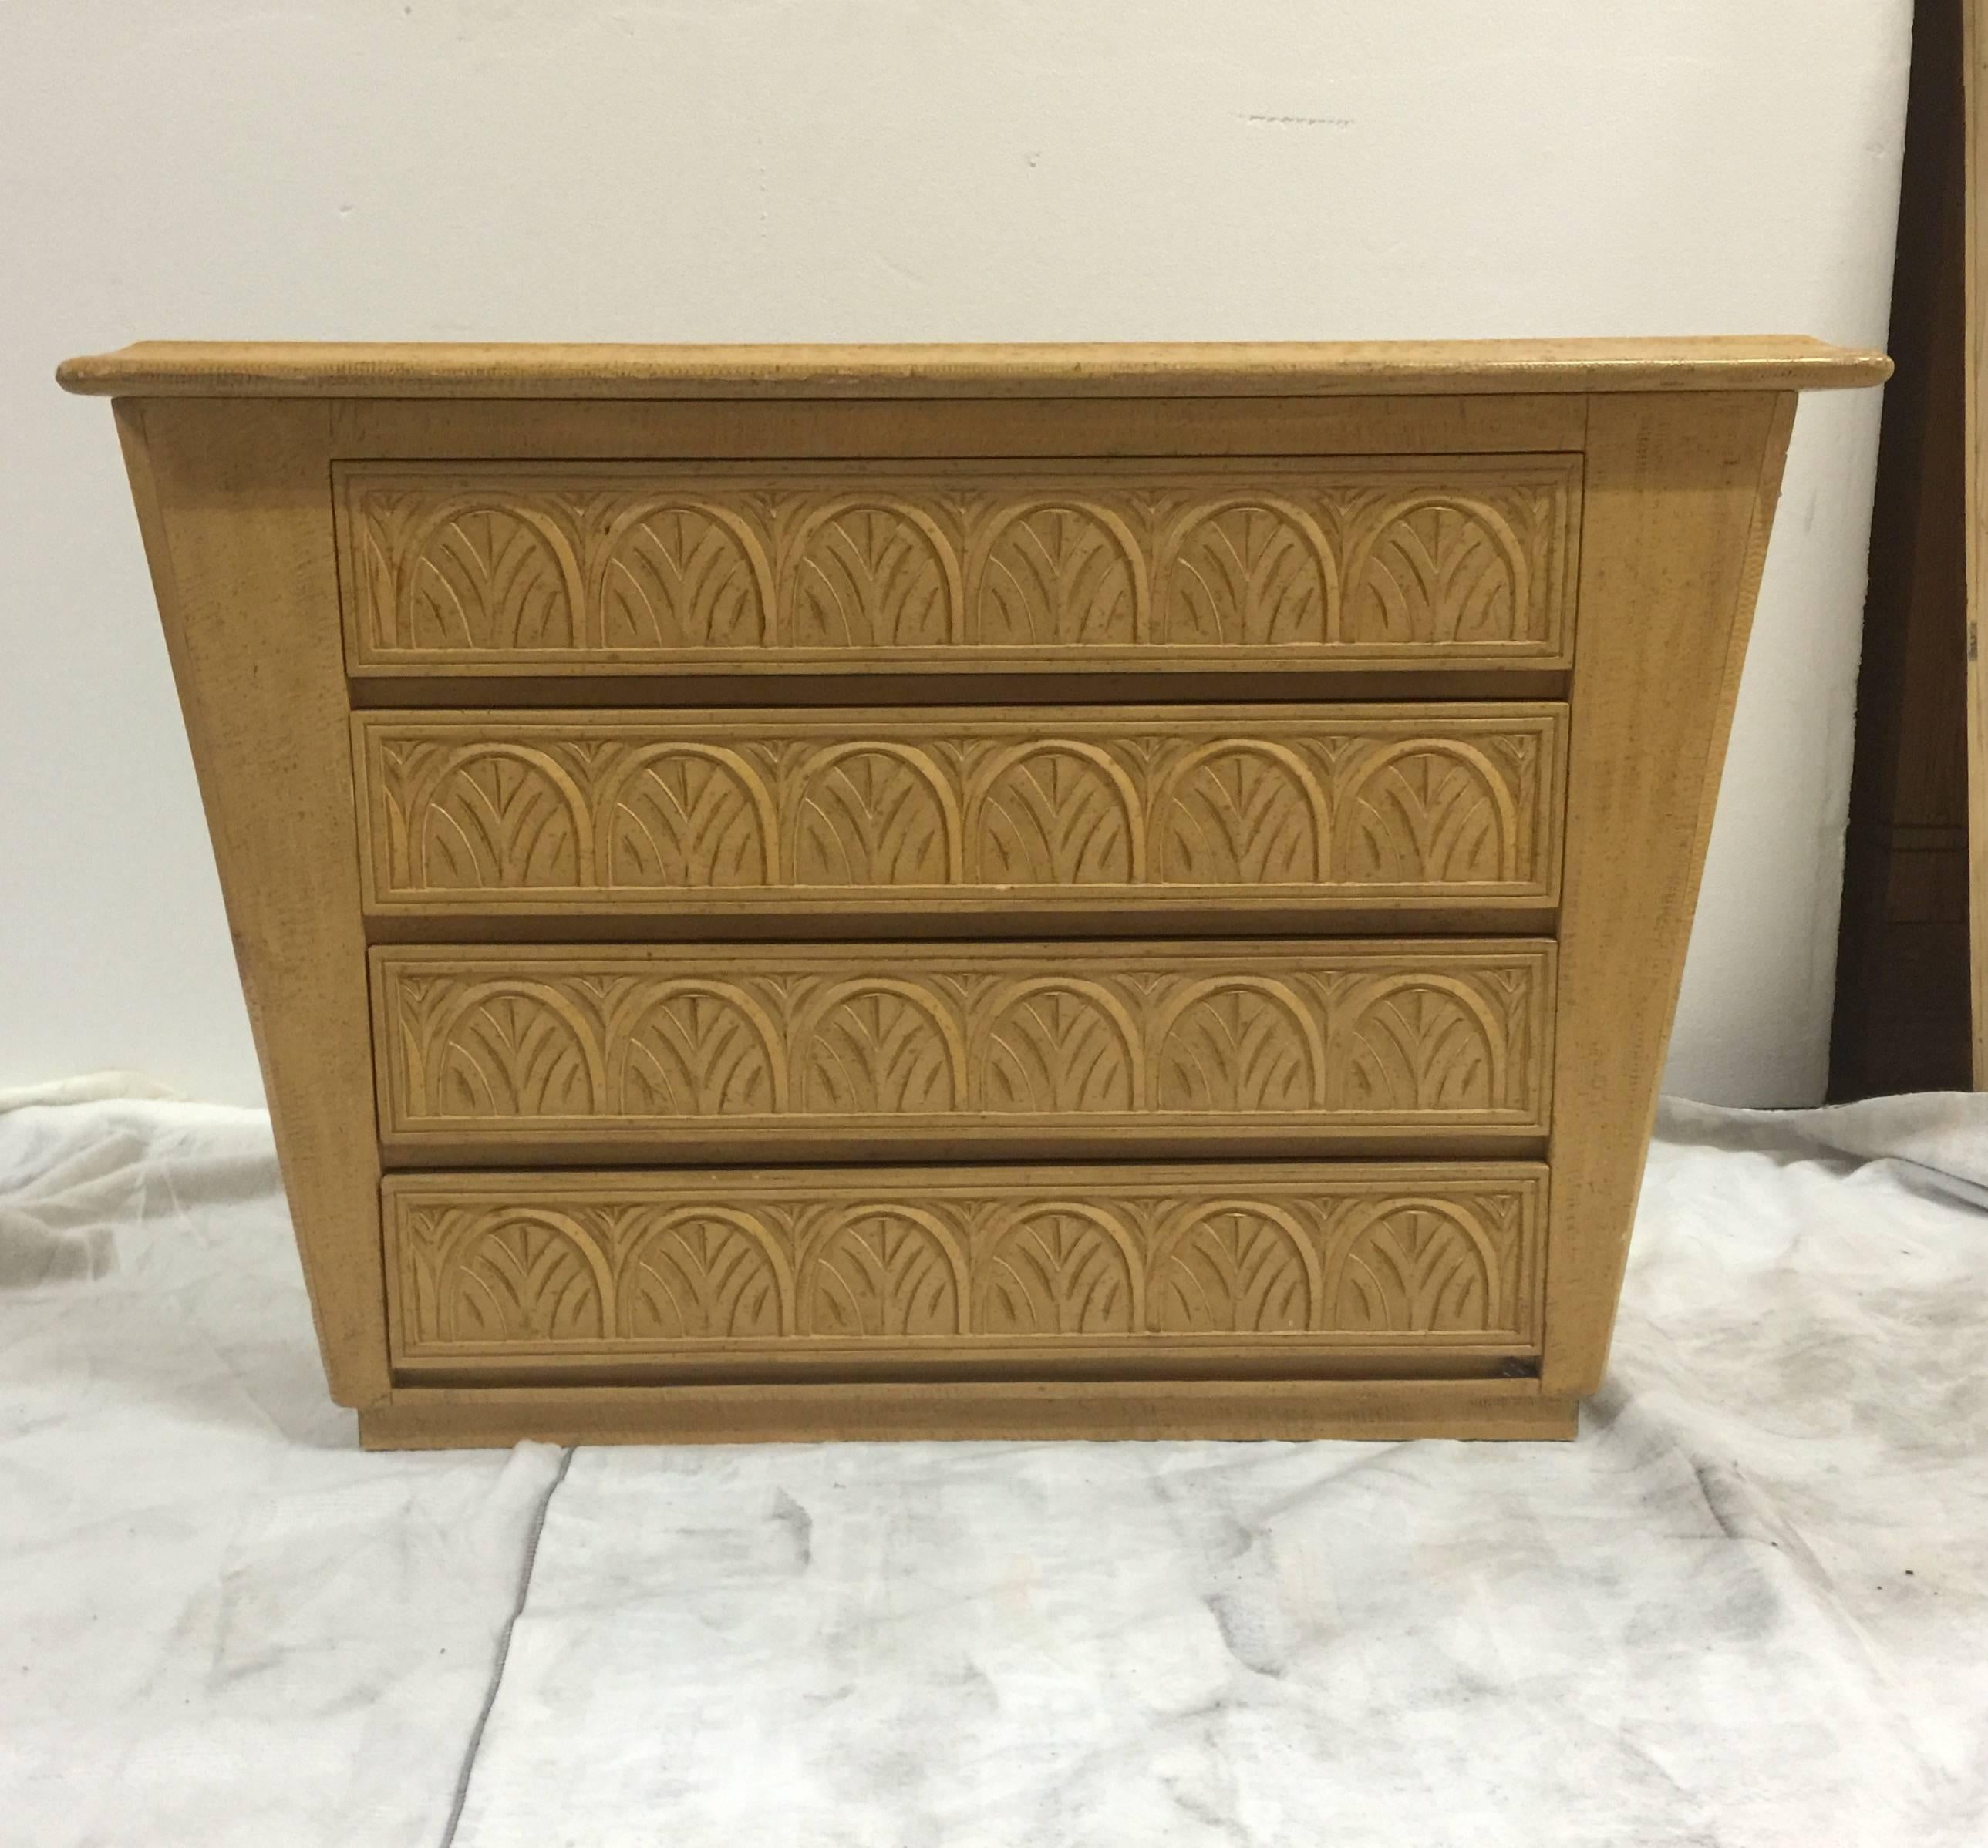 A blond wood dresser or chest with four drawers featuring a repeating carved design. USA, circa 1980. Finely constructed and versatile style.